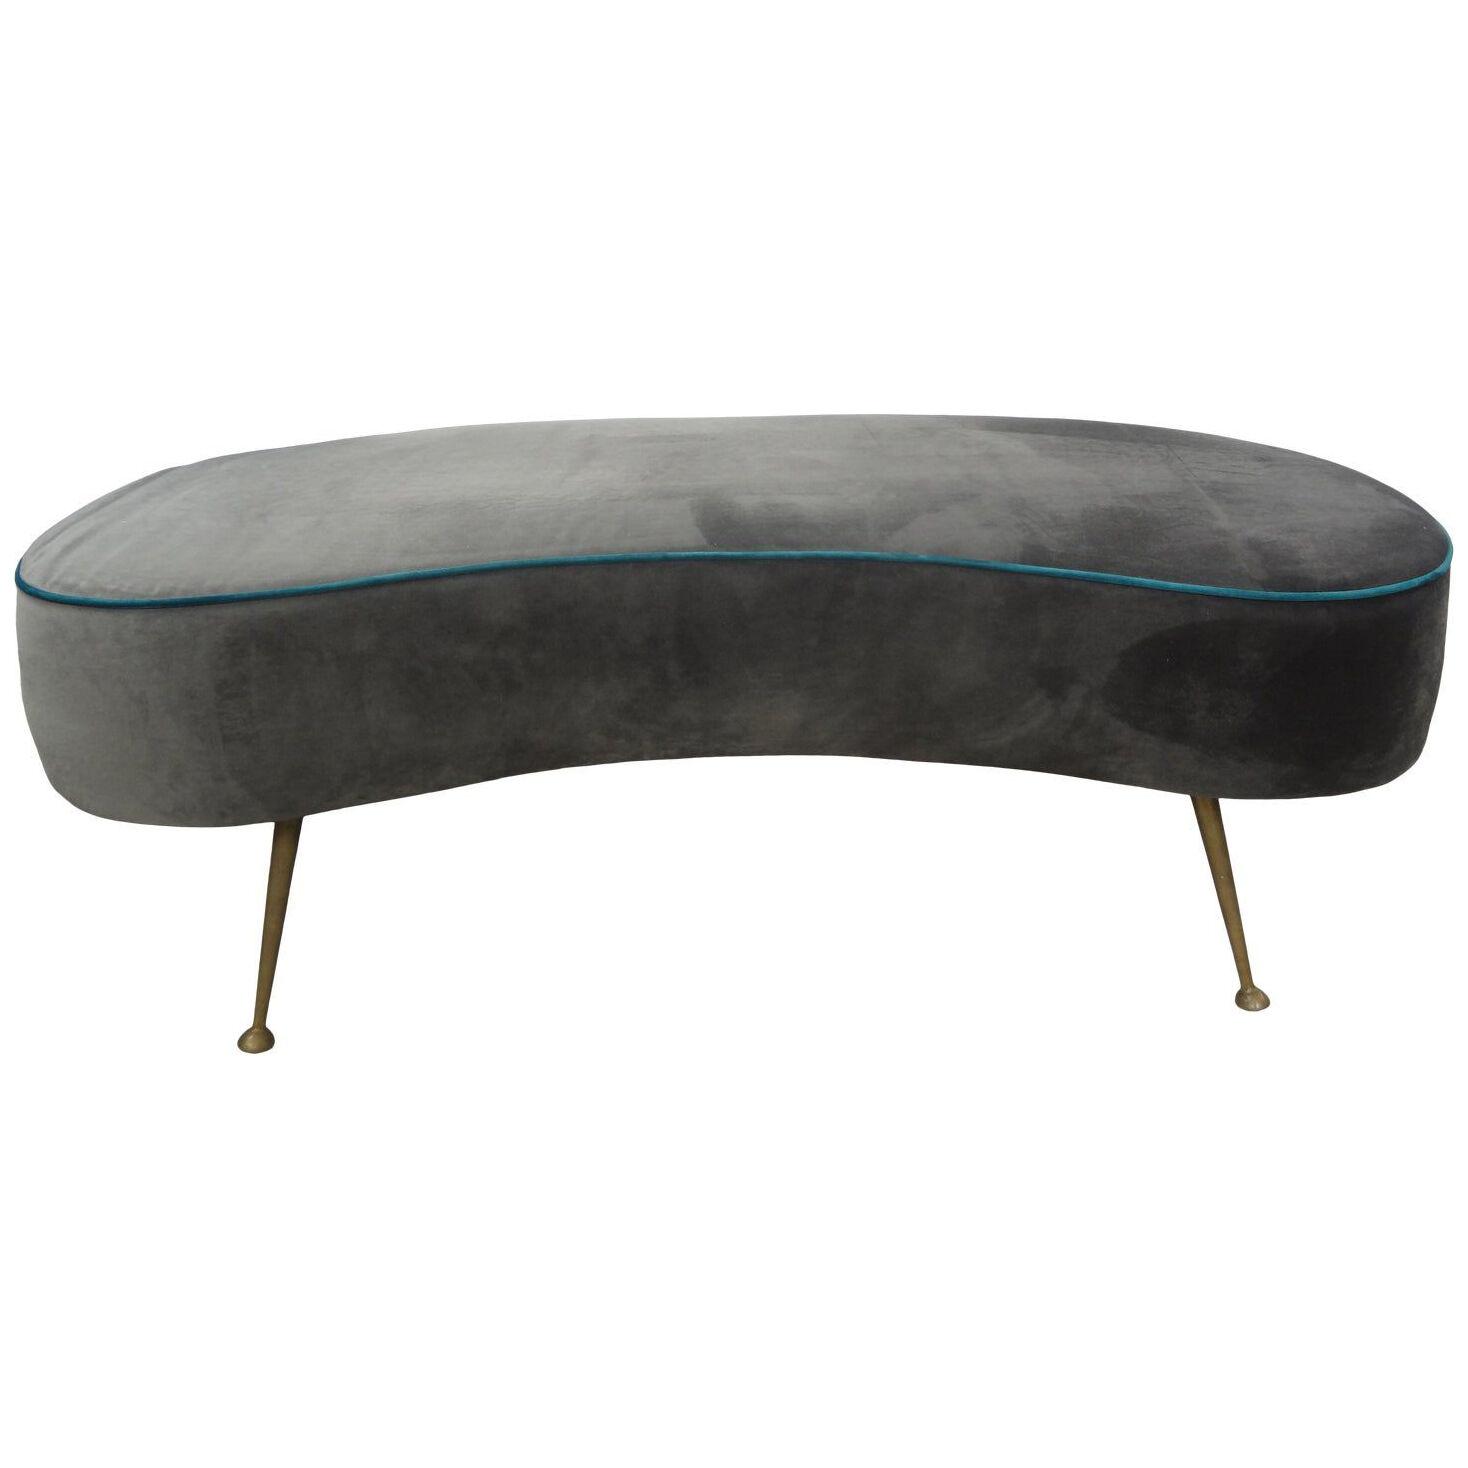 Large Italian Curved Bench With Brass Legs by Marco Zanuso